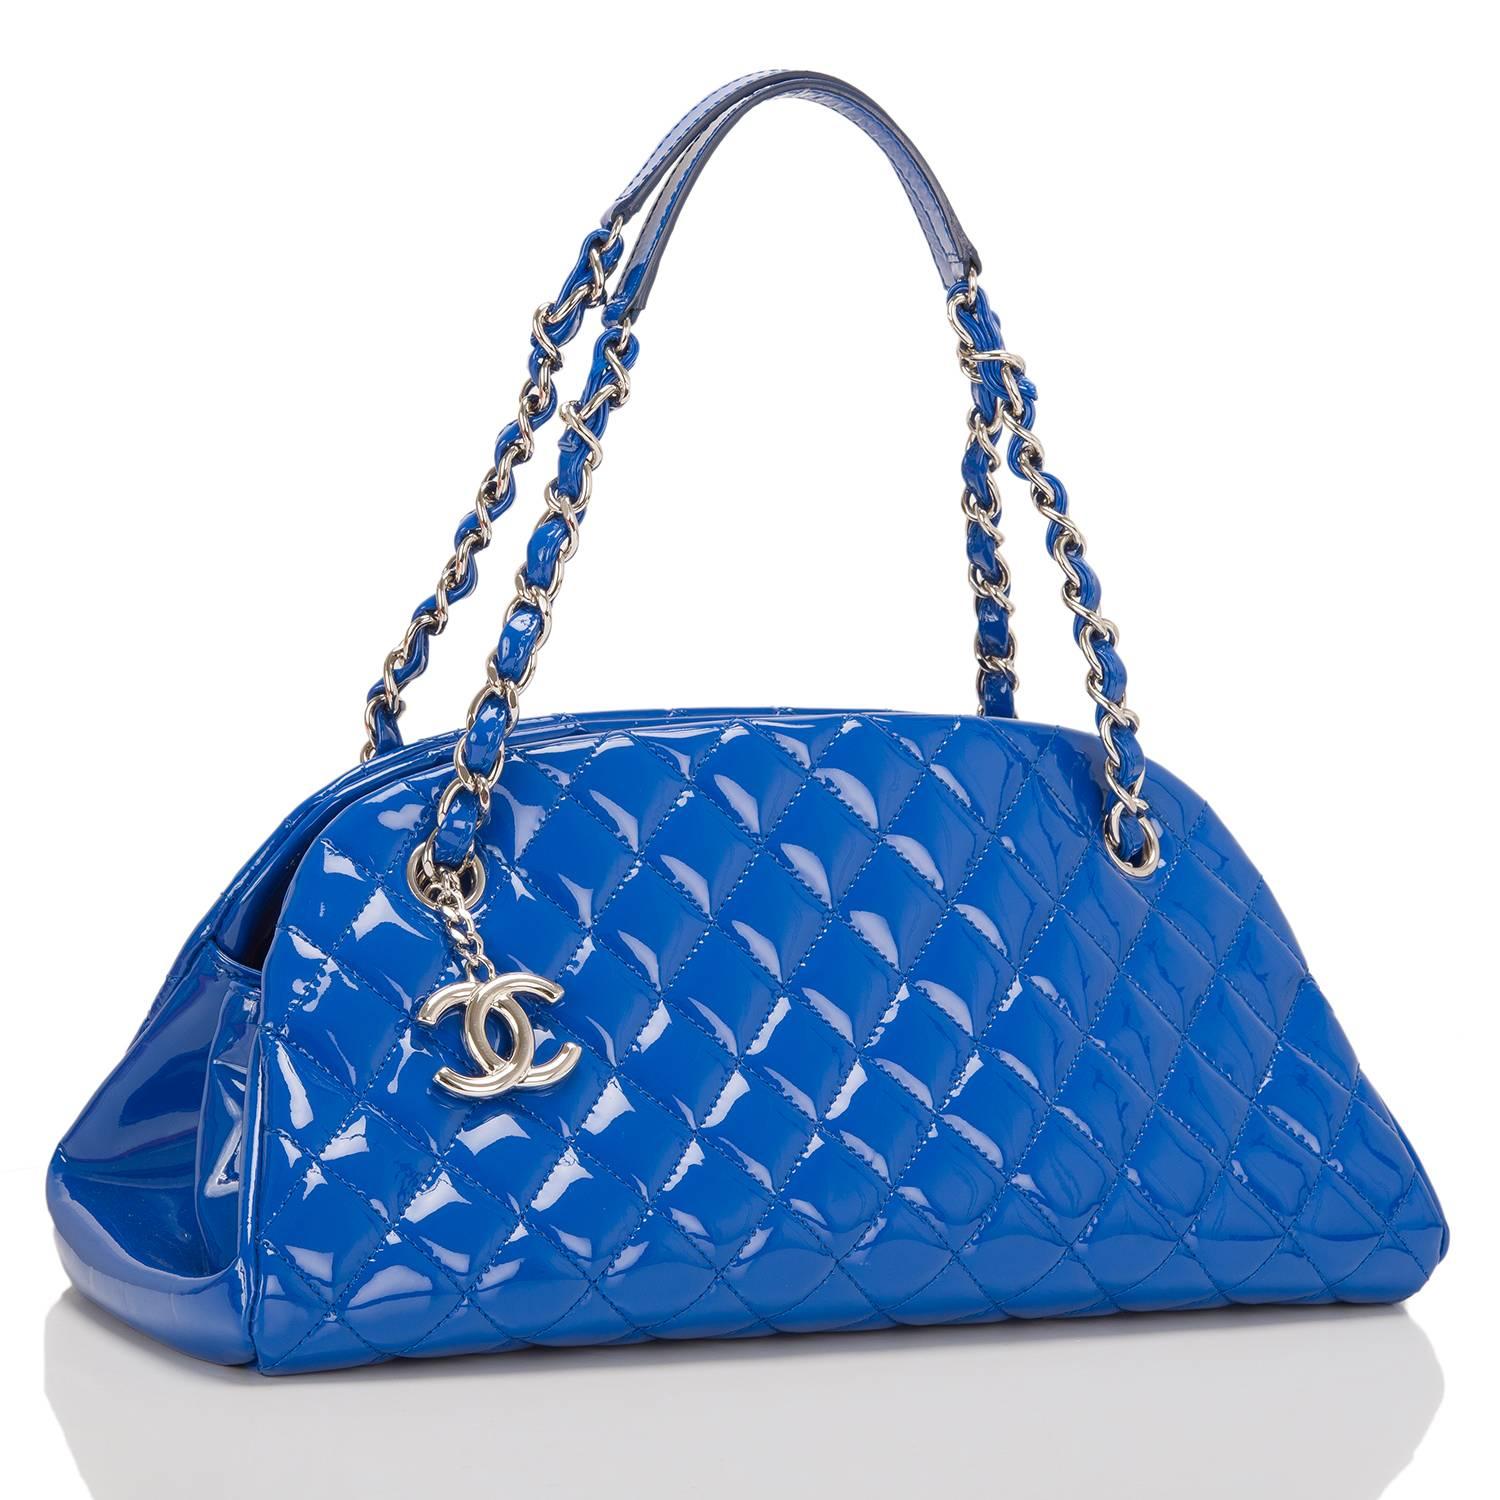 This Chanel Just Mademoiselle bag is made of bright blue patent leather and accented with silver tone hardware.

The bag features a front dangling signature CC charm, an open top closure and interwoven silver tone chain link and blue leather